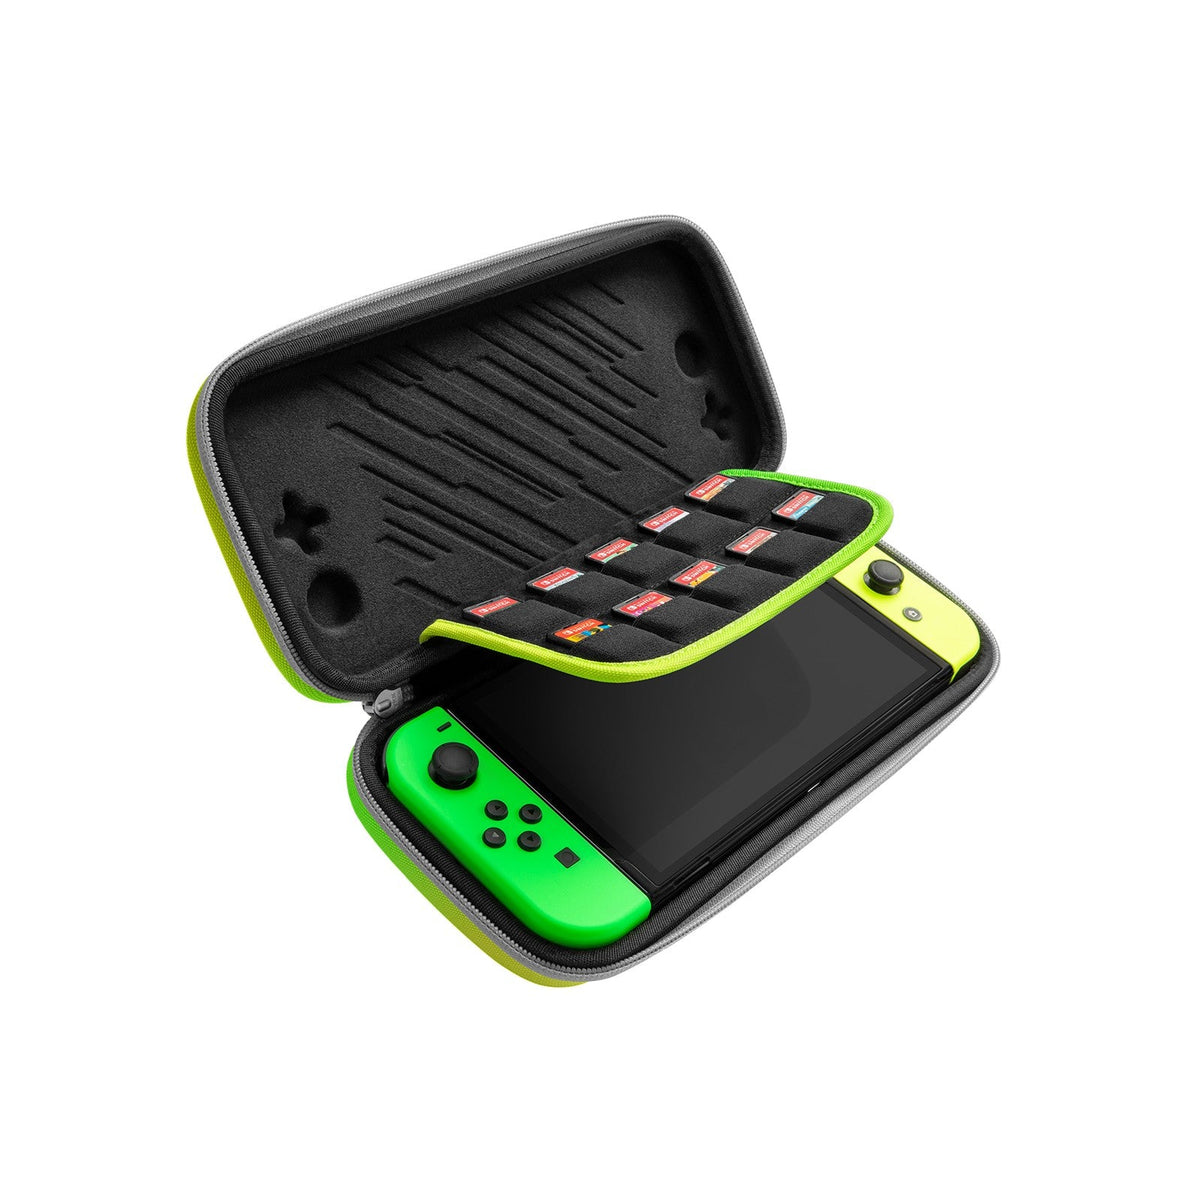 Switch OLED case green